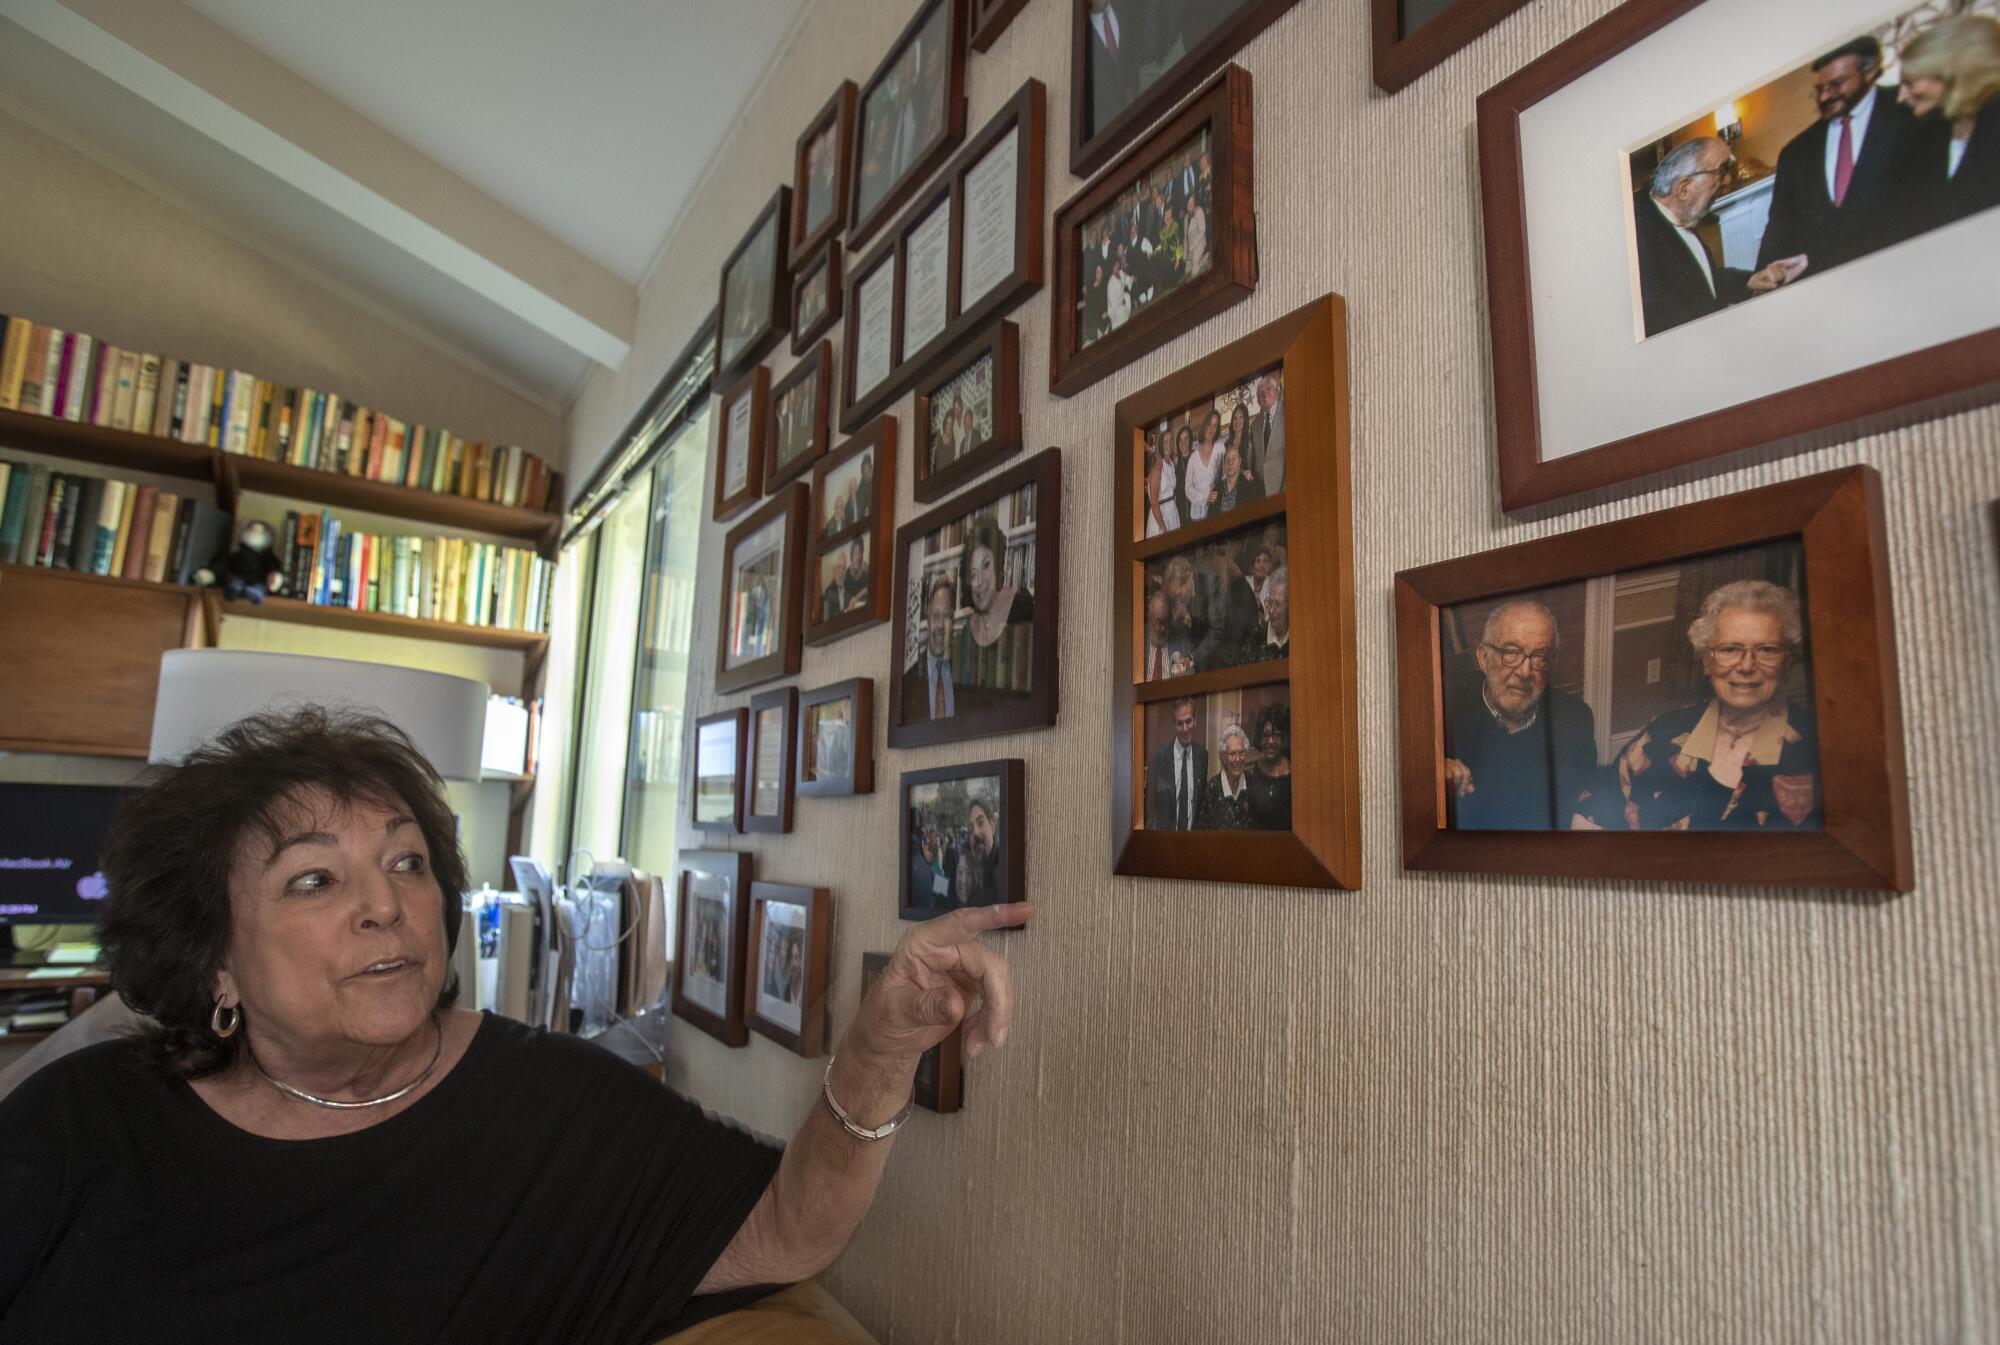 Alice Lynn points to a photograph of social activists Stanley and Betty Sheinbaum, lower right, on the "memory wall"